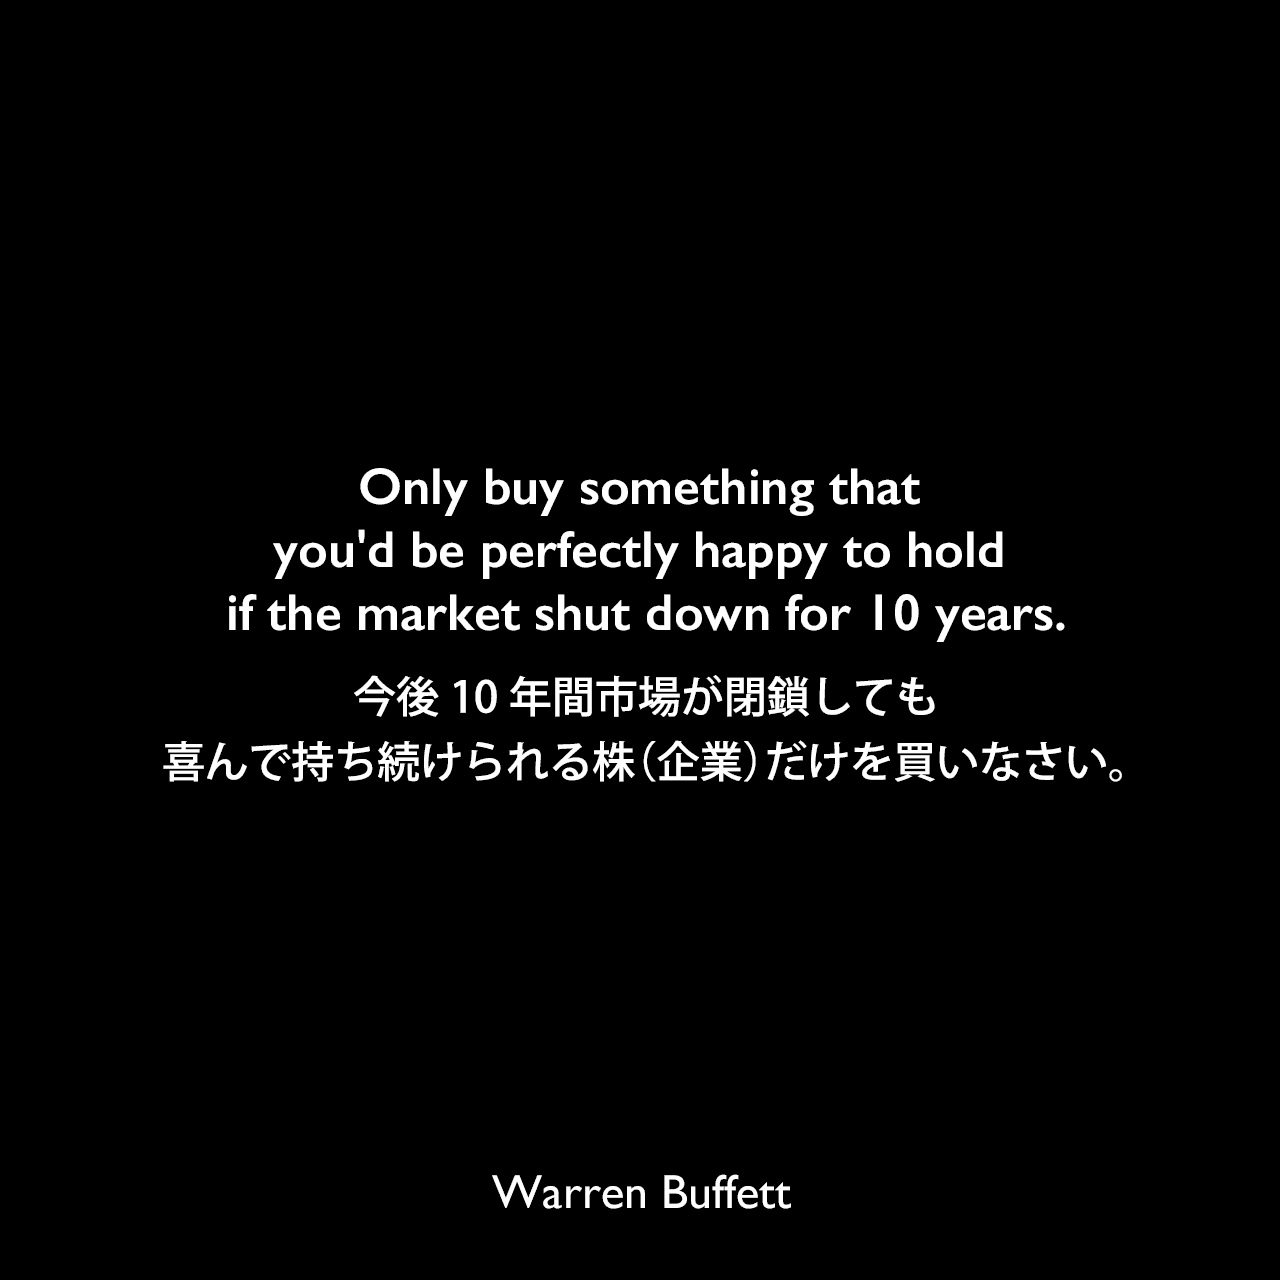 Only buy something that you'd be perfectly happy to hold if the market shut down for 10 years.今後10年間市場が閉鎖しても喜んで持ち続けられる株（企業）だけを買いなさい。Warren Buffett